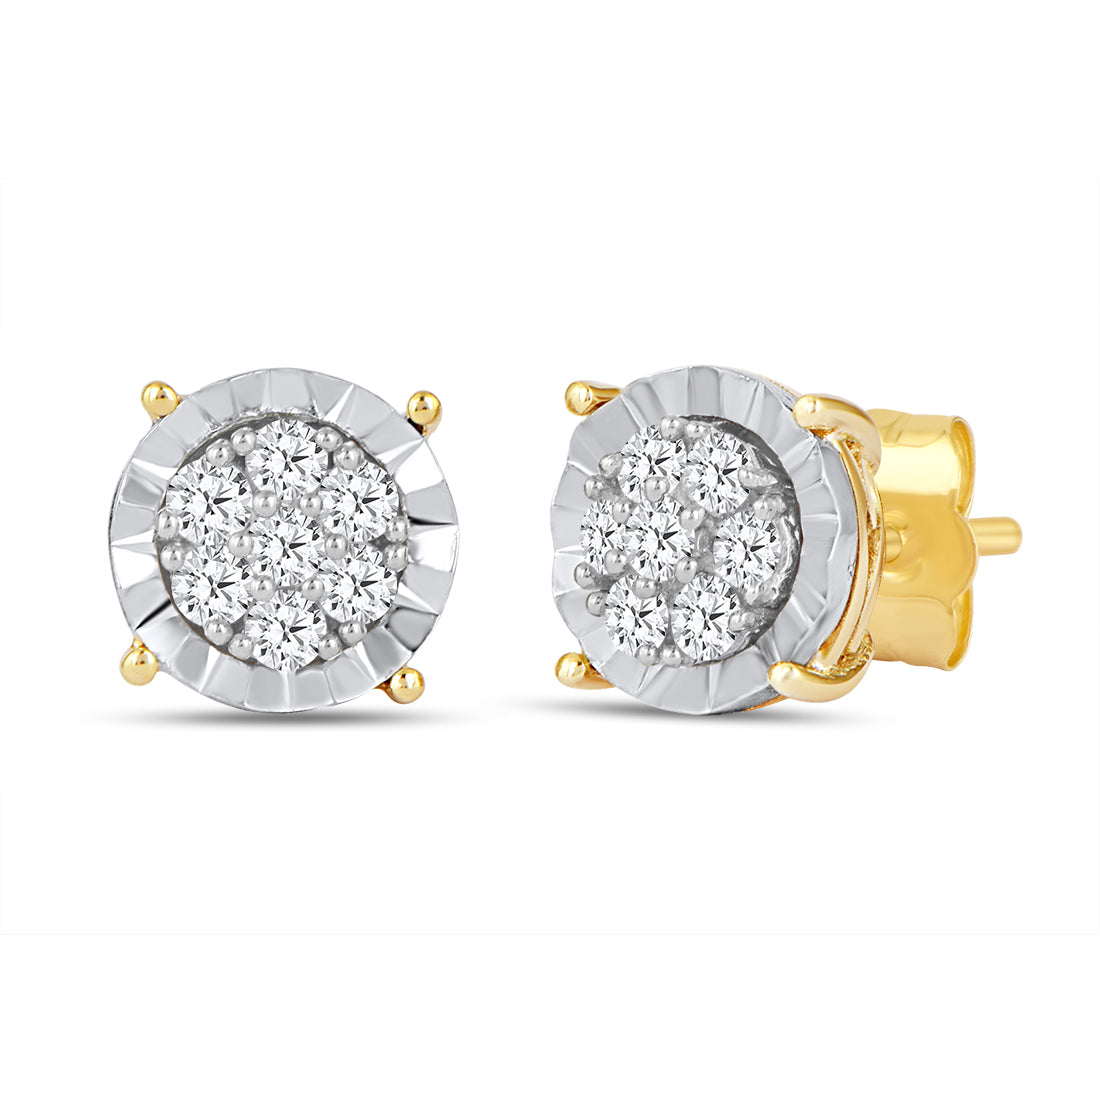 Tia Miracle Halo Compoite Earrings with 0.10ct of Diamonds in 9ct Yellow Gold Earrings Bevilles 